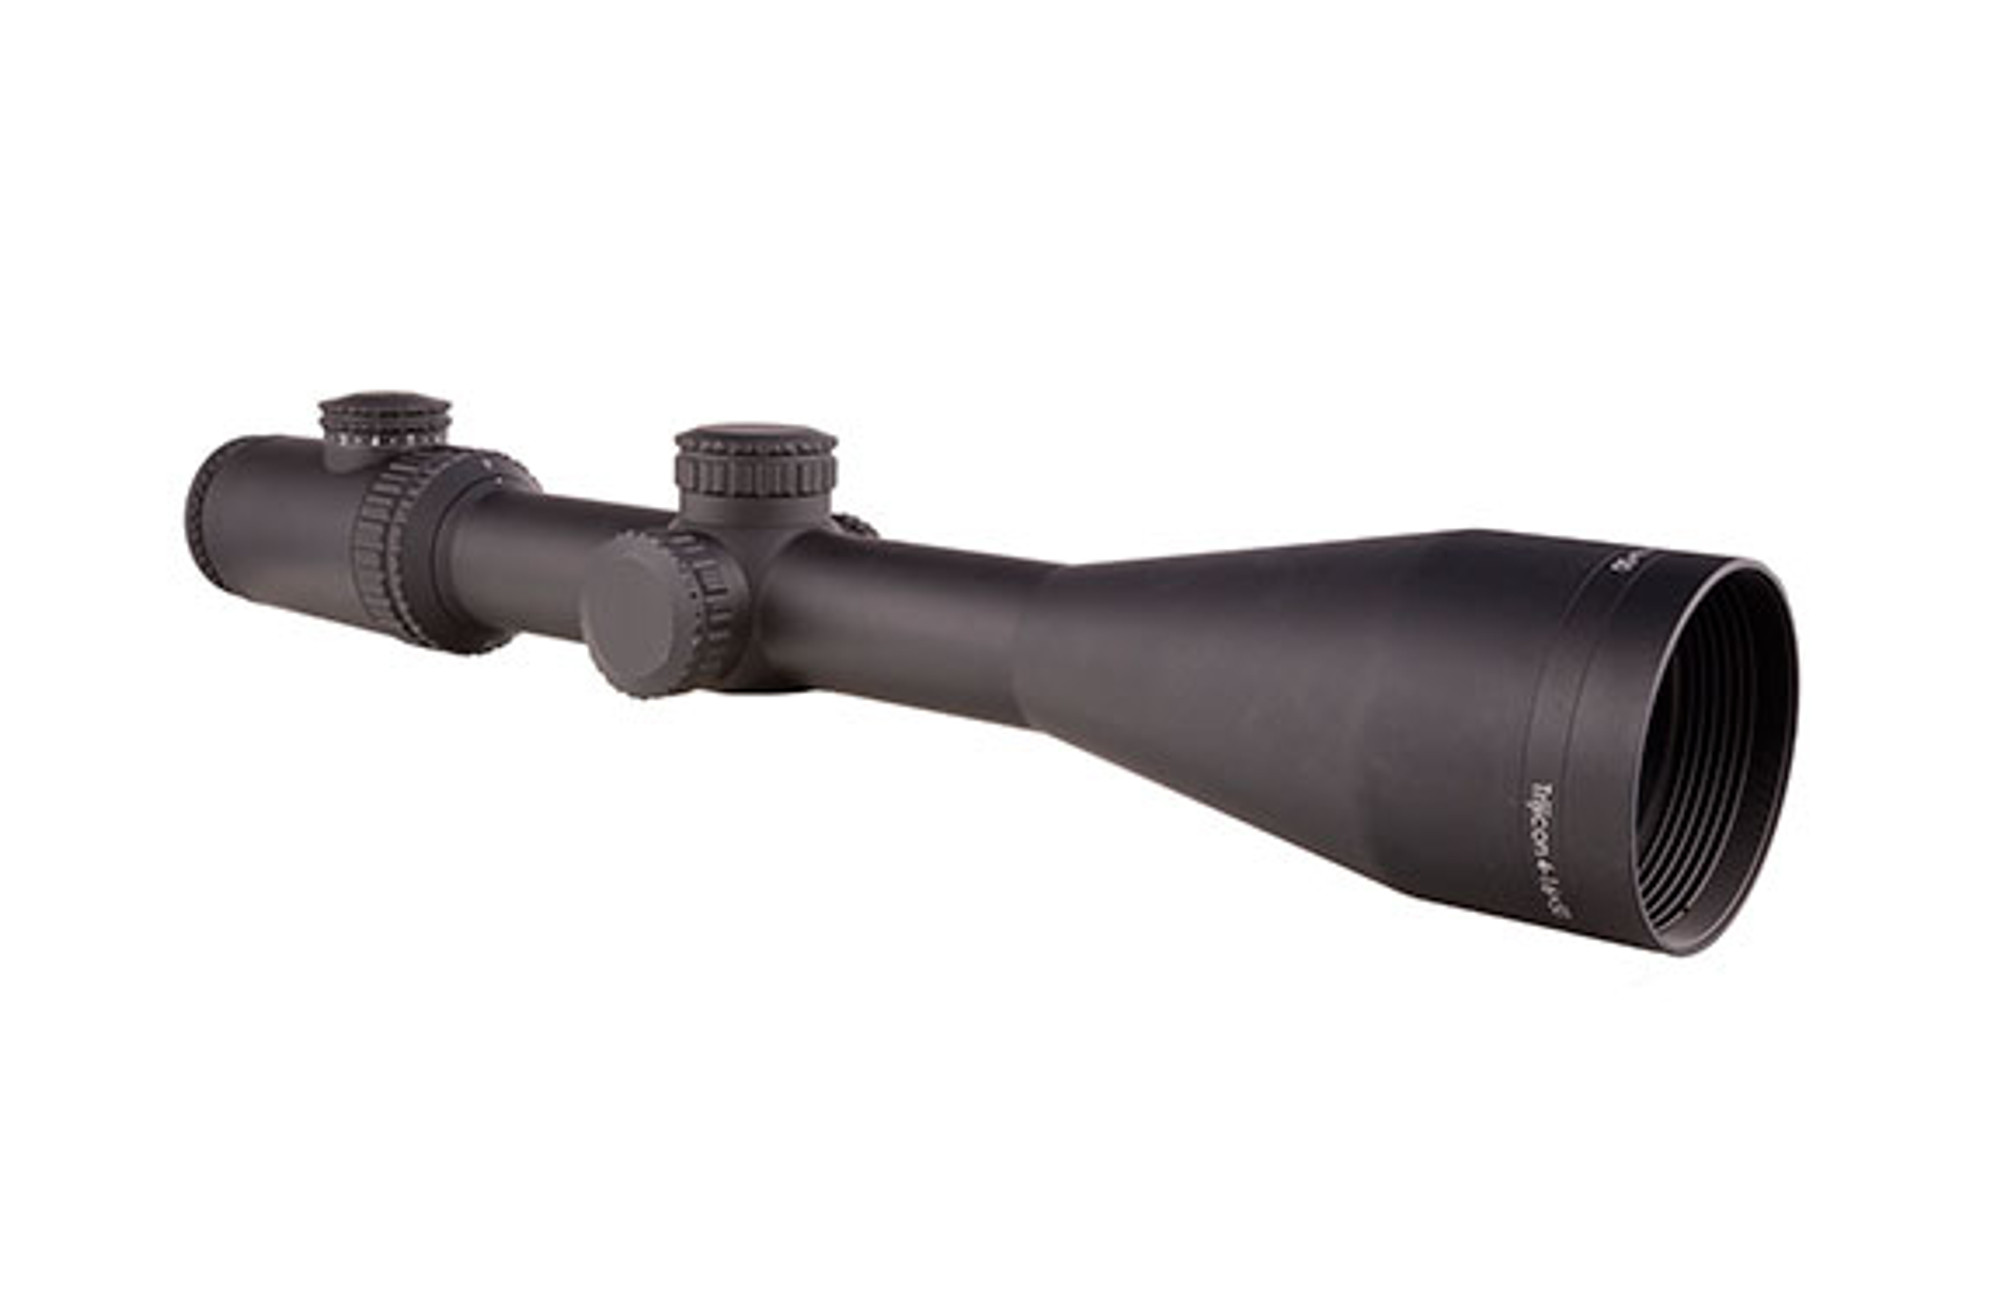 Trijicon AccuPower 4-16x50 Riflescope MIL-Square Crosshair w/ Green LED, 30mm Tube